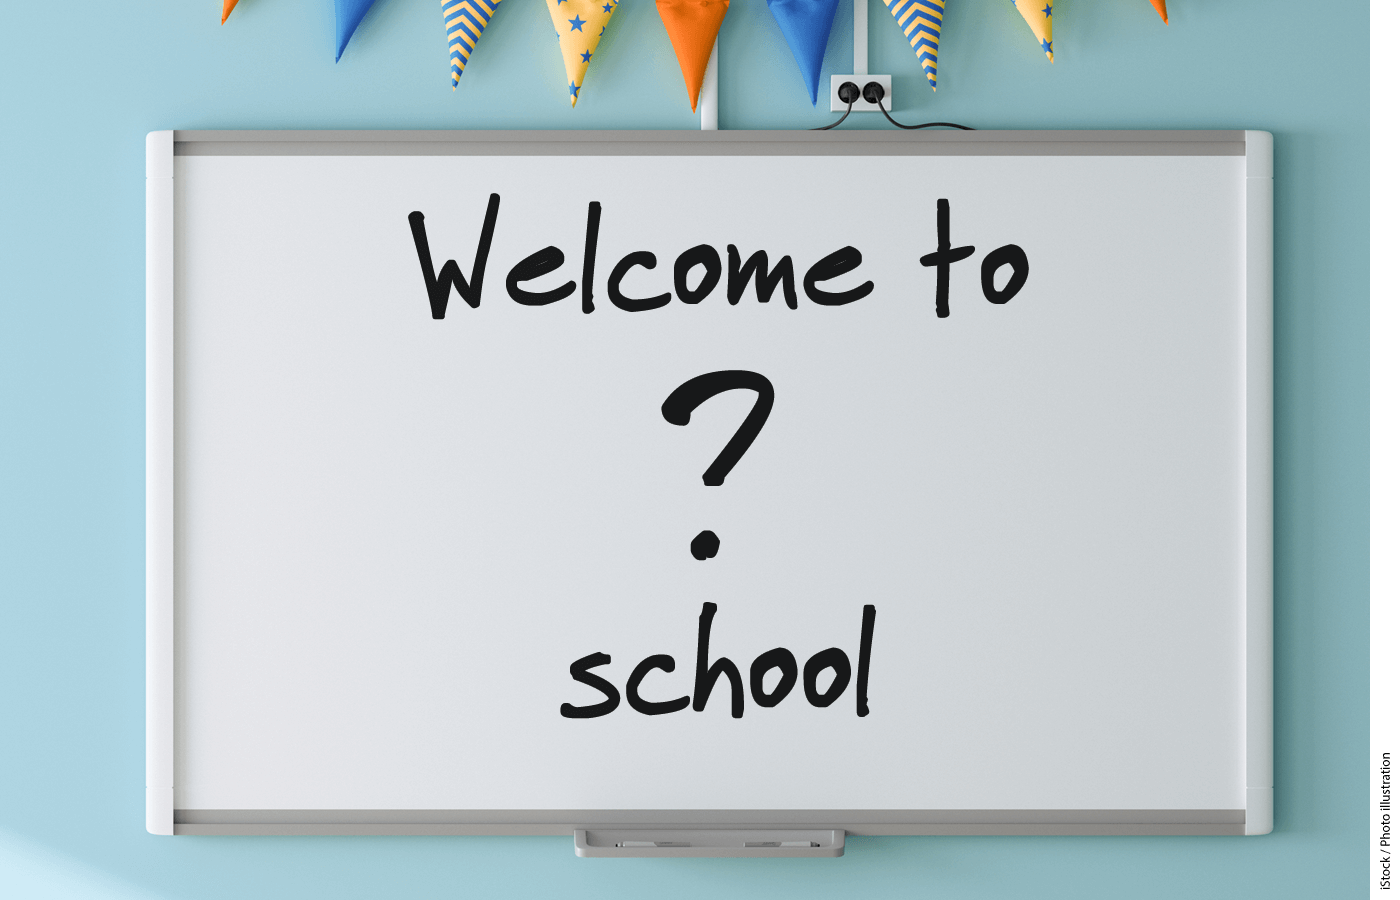 A whiteboard with "Welcome to ? school" written in marker on it